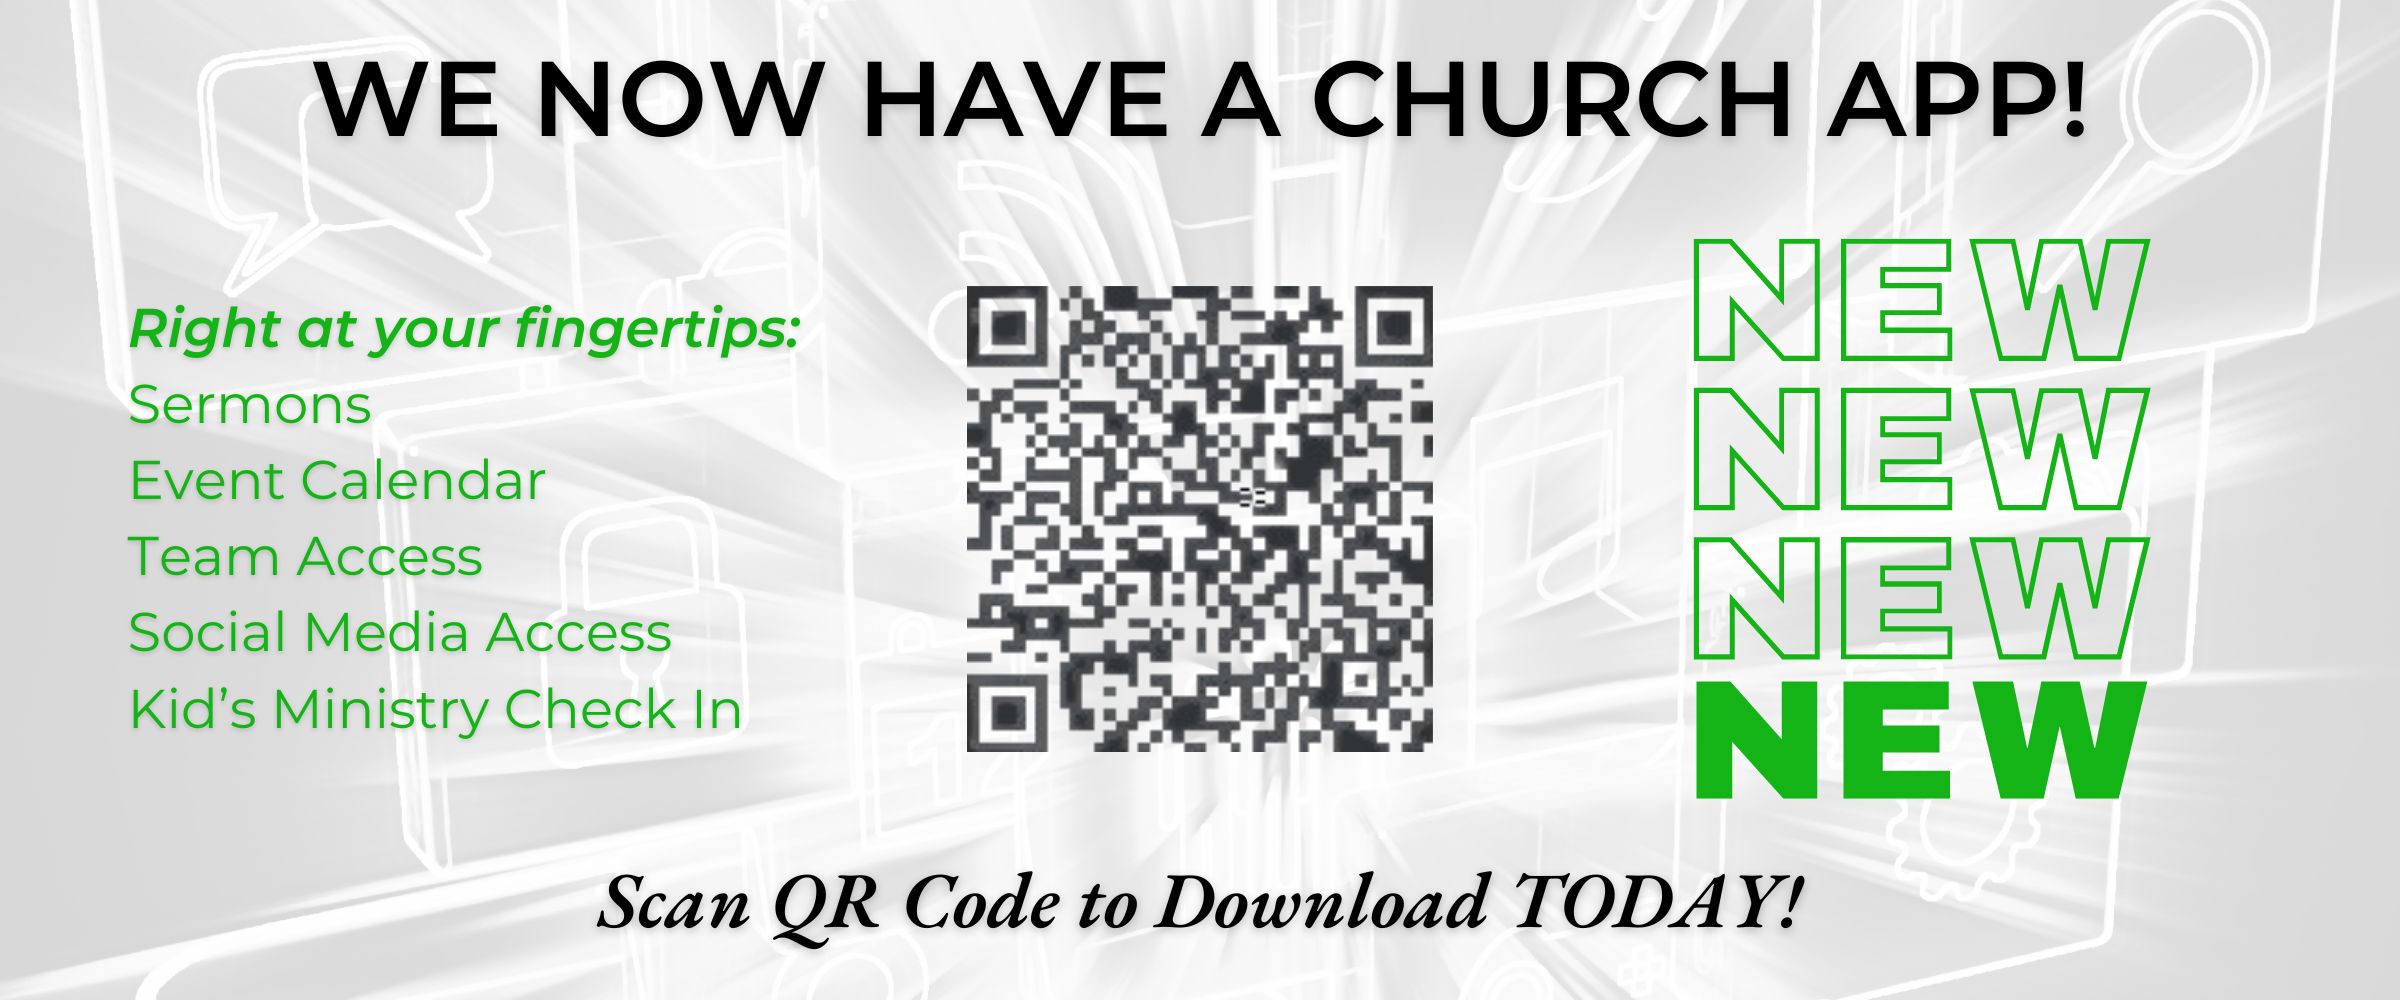 We now have a church app! (1200 x 500 px)